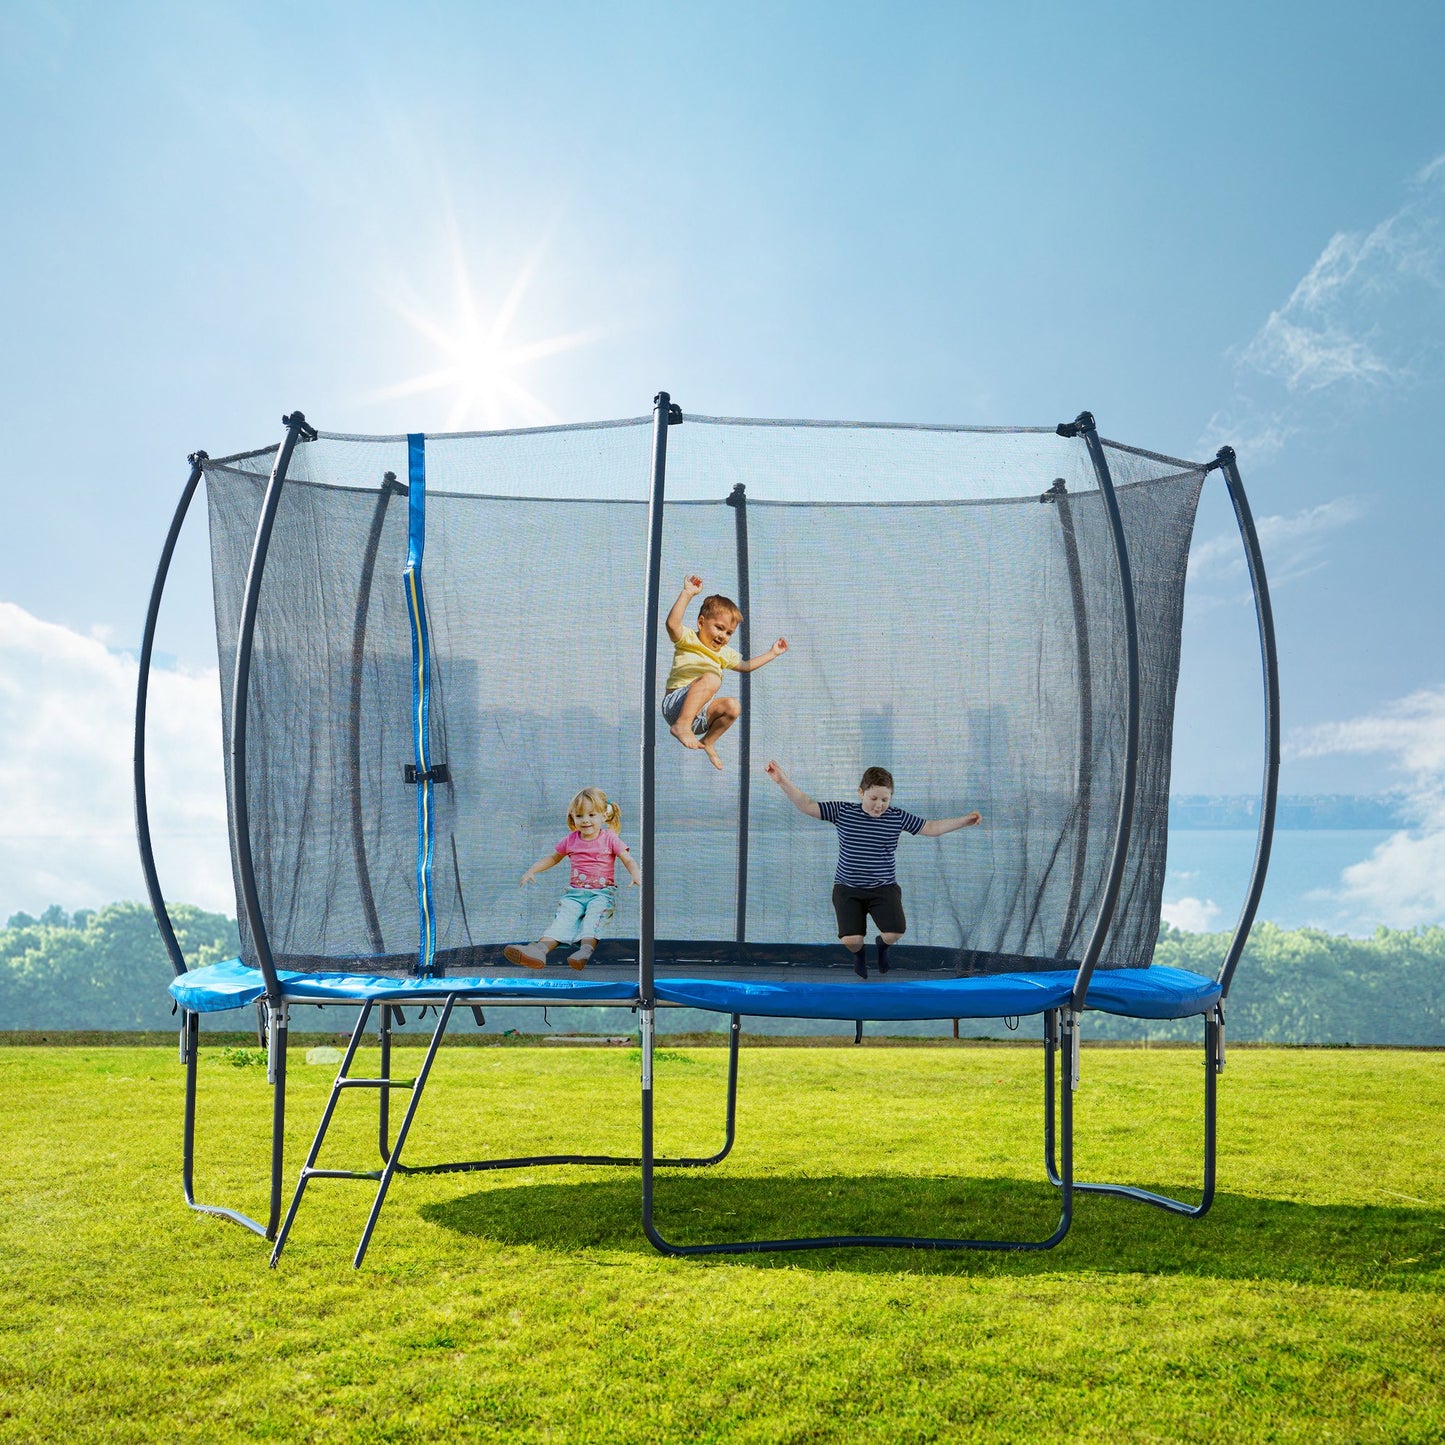 Soges 1200LBS 12FT Trampoline for Kids and Adults,Trampoline with Enclosure,Recreational Trampoline with Ladder, Outdoor Heavy Duty Trampoline ASTM Approved Round Trampoline Capacity for 4-5 Kids